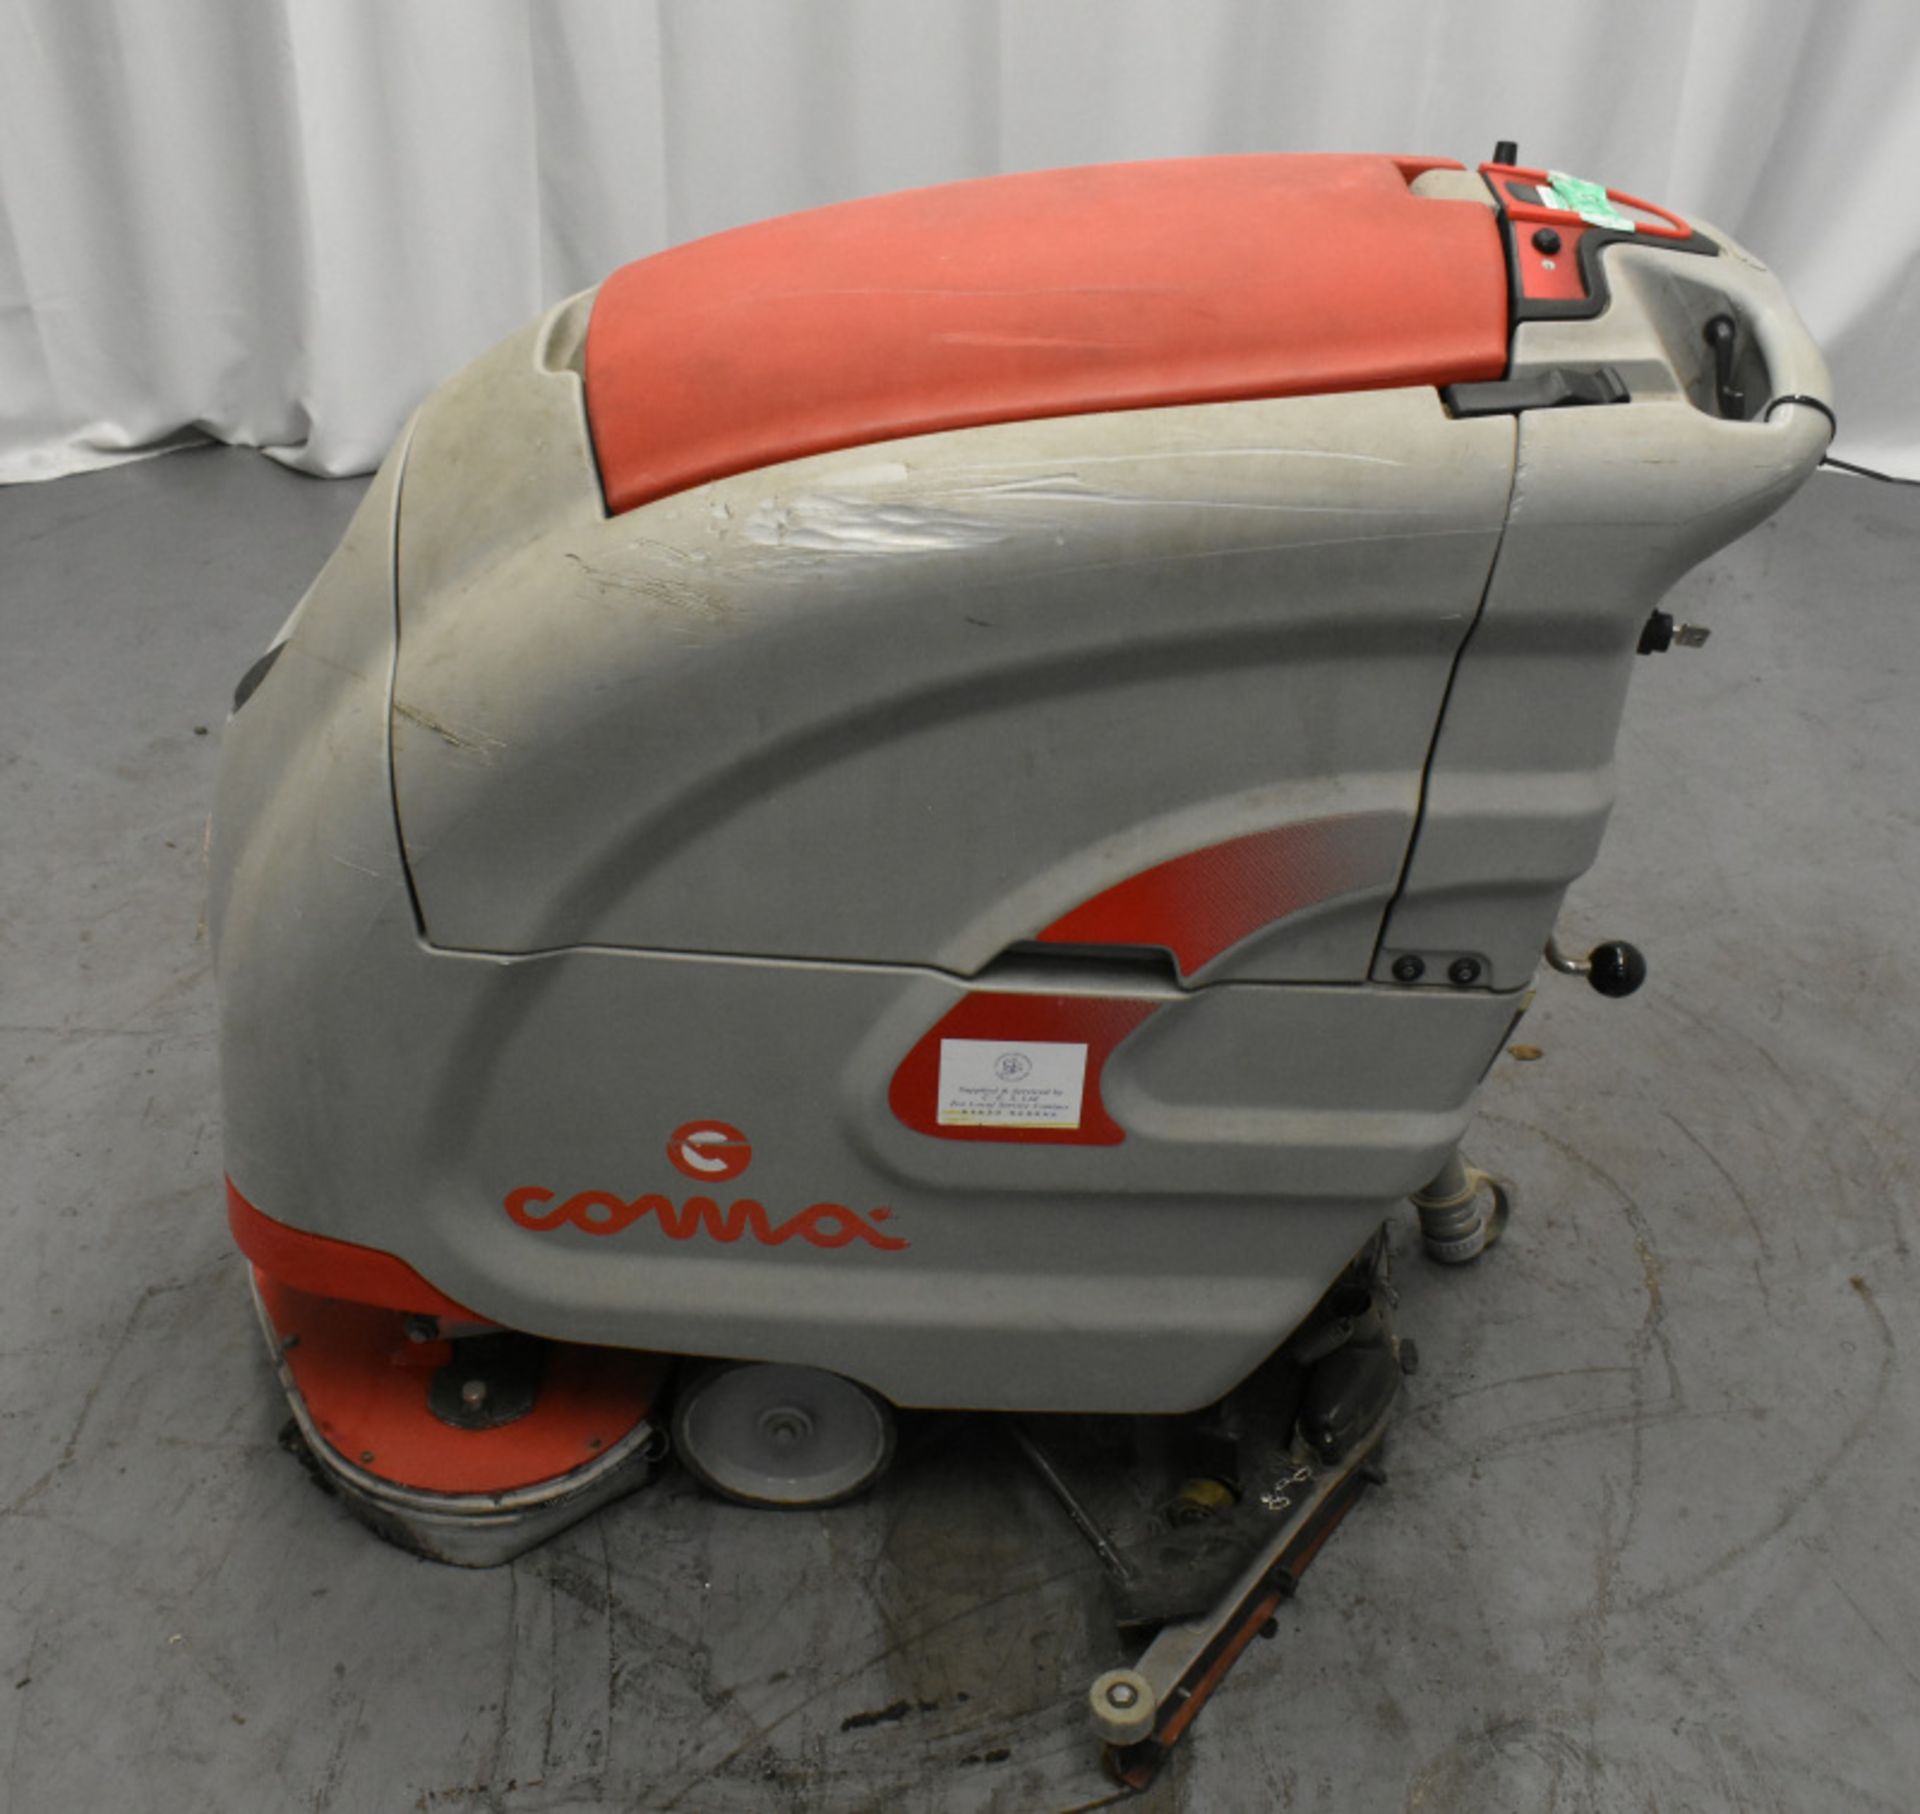 Comac Abila 52Bt Floor Scrubber Dryer, comes with key, starts and runs- 945 hours